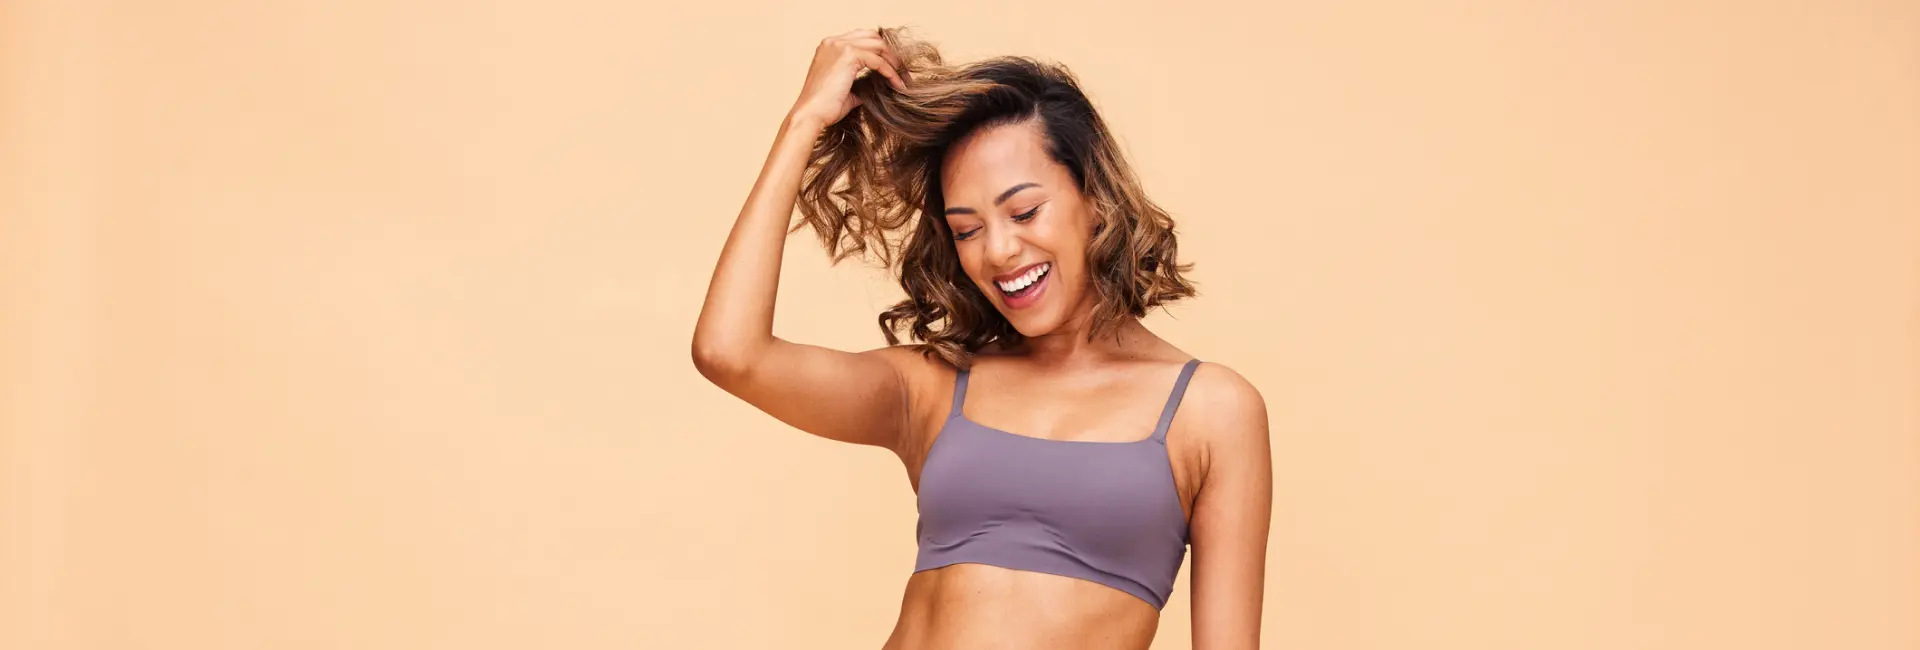 A woman in a gray sports bra smiling with her eyes closed, holding her hair up against a beige background.